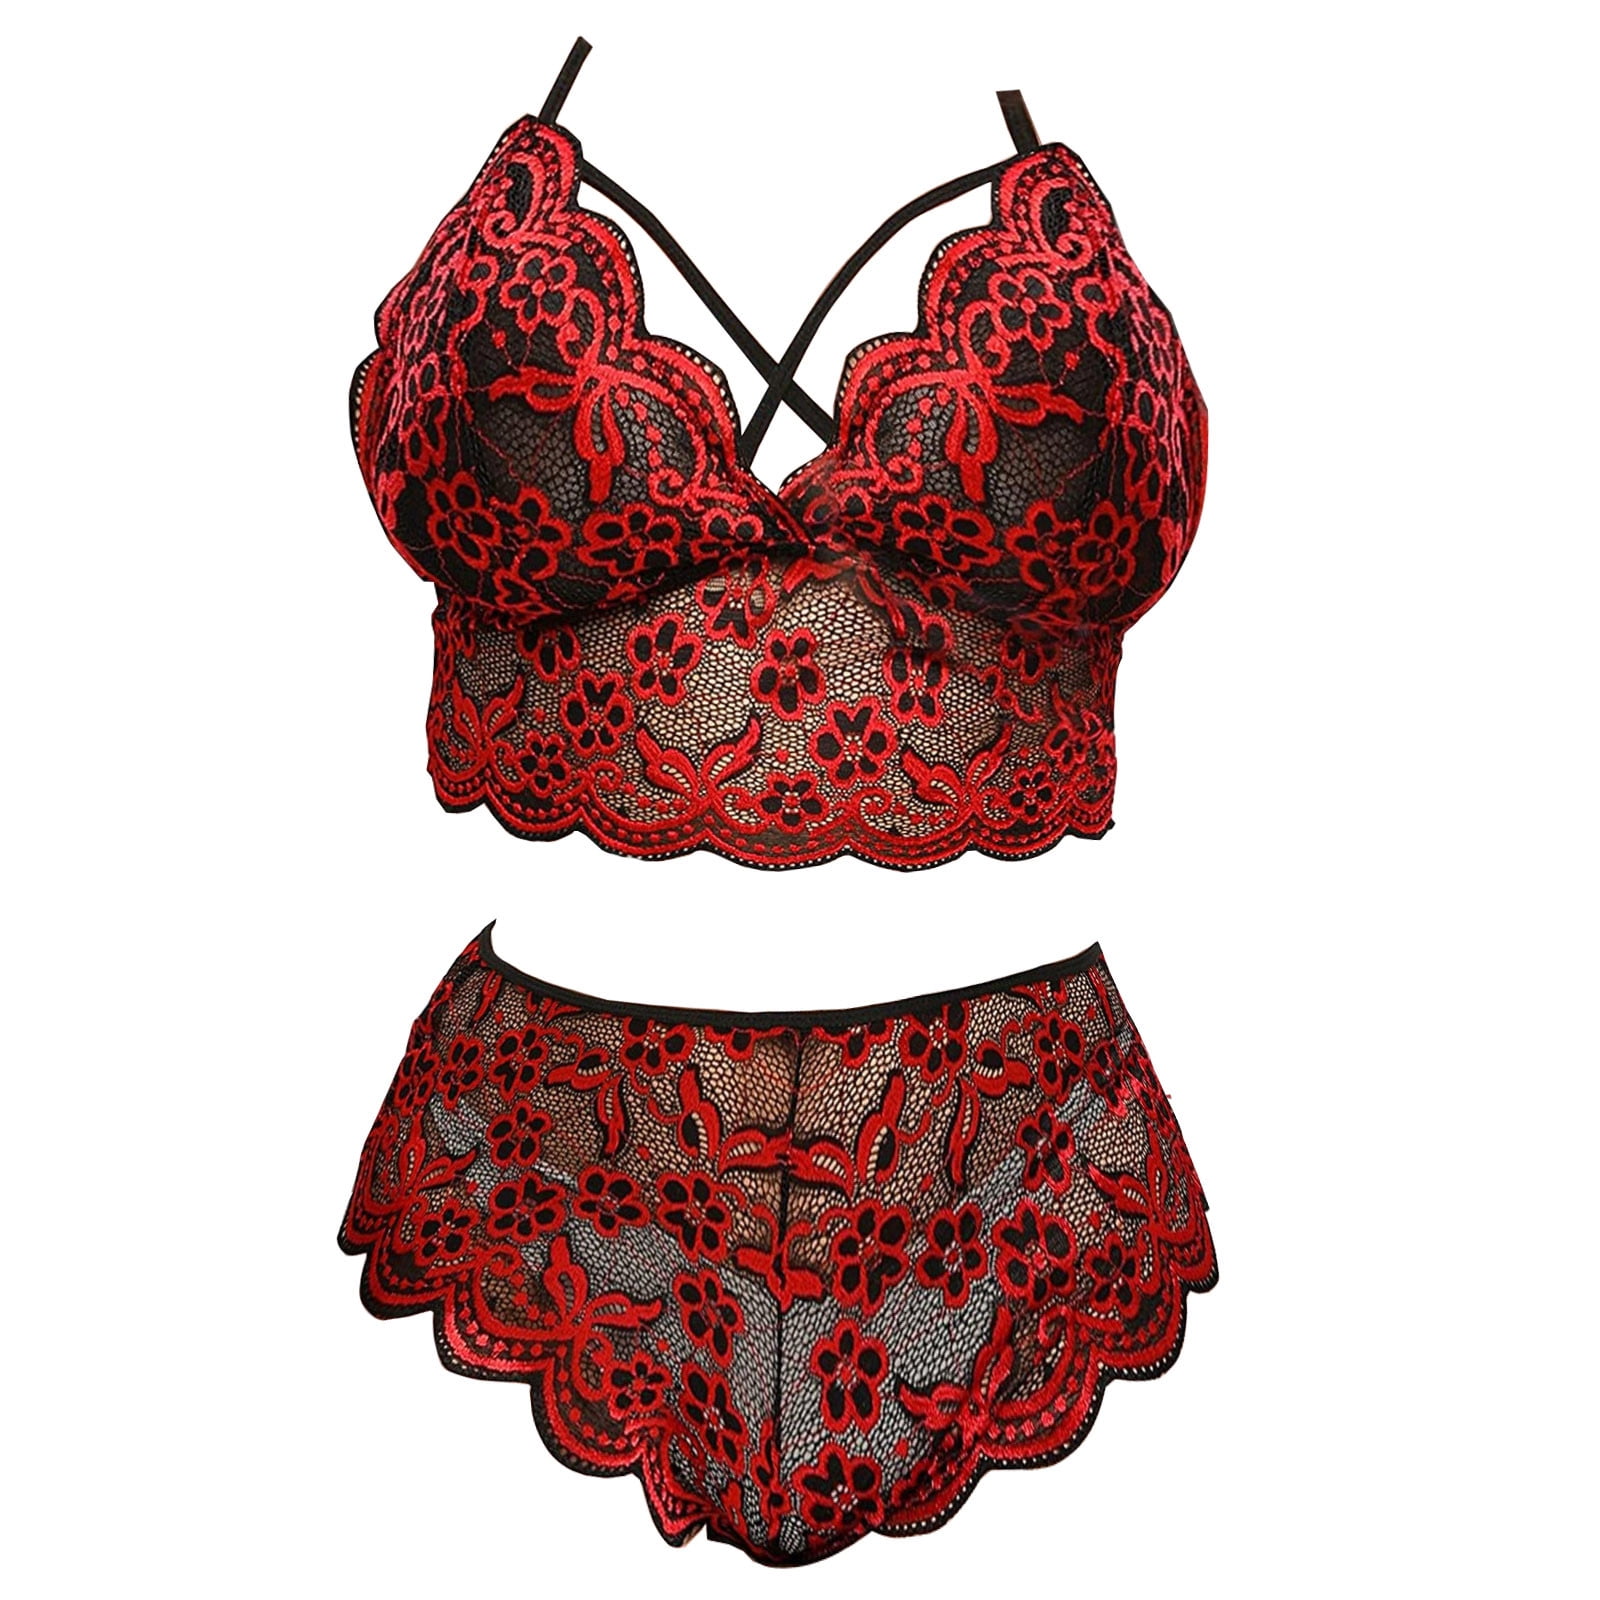 HSIA Pretty In Petals Unlined Lace Mesh Bra and Panty set for Full Figure